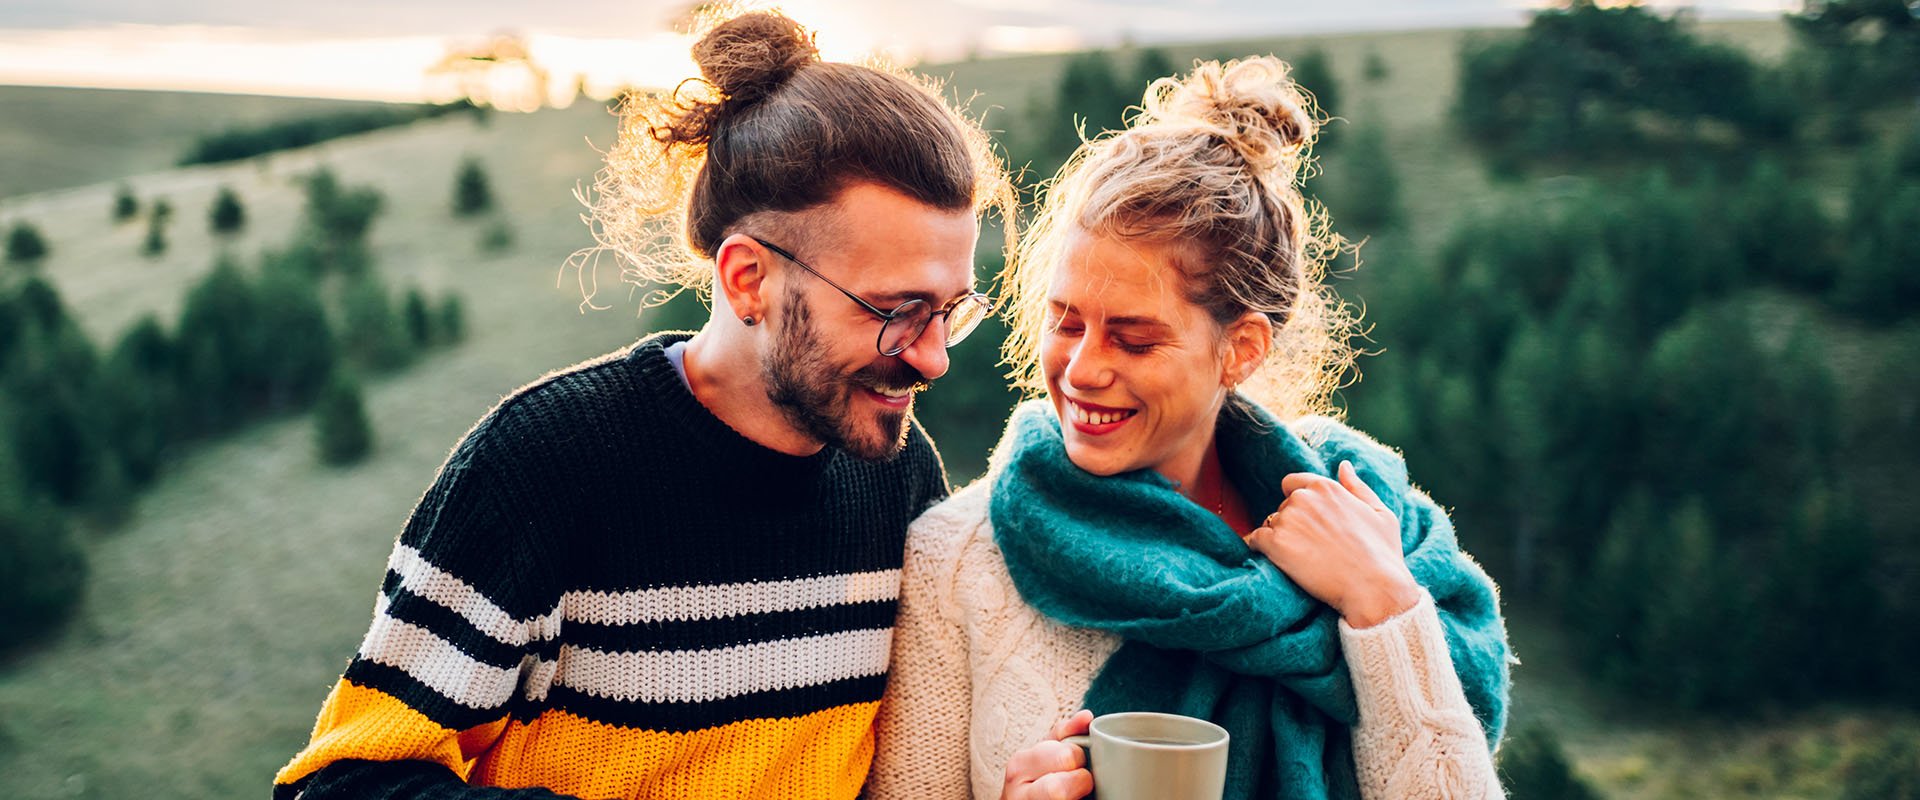 Man and woman laughing together outside in nature symbolizing different types of relationship